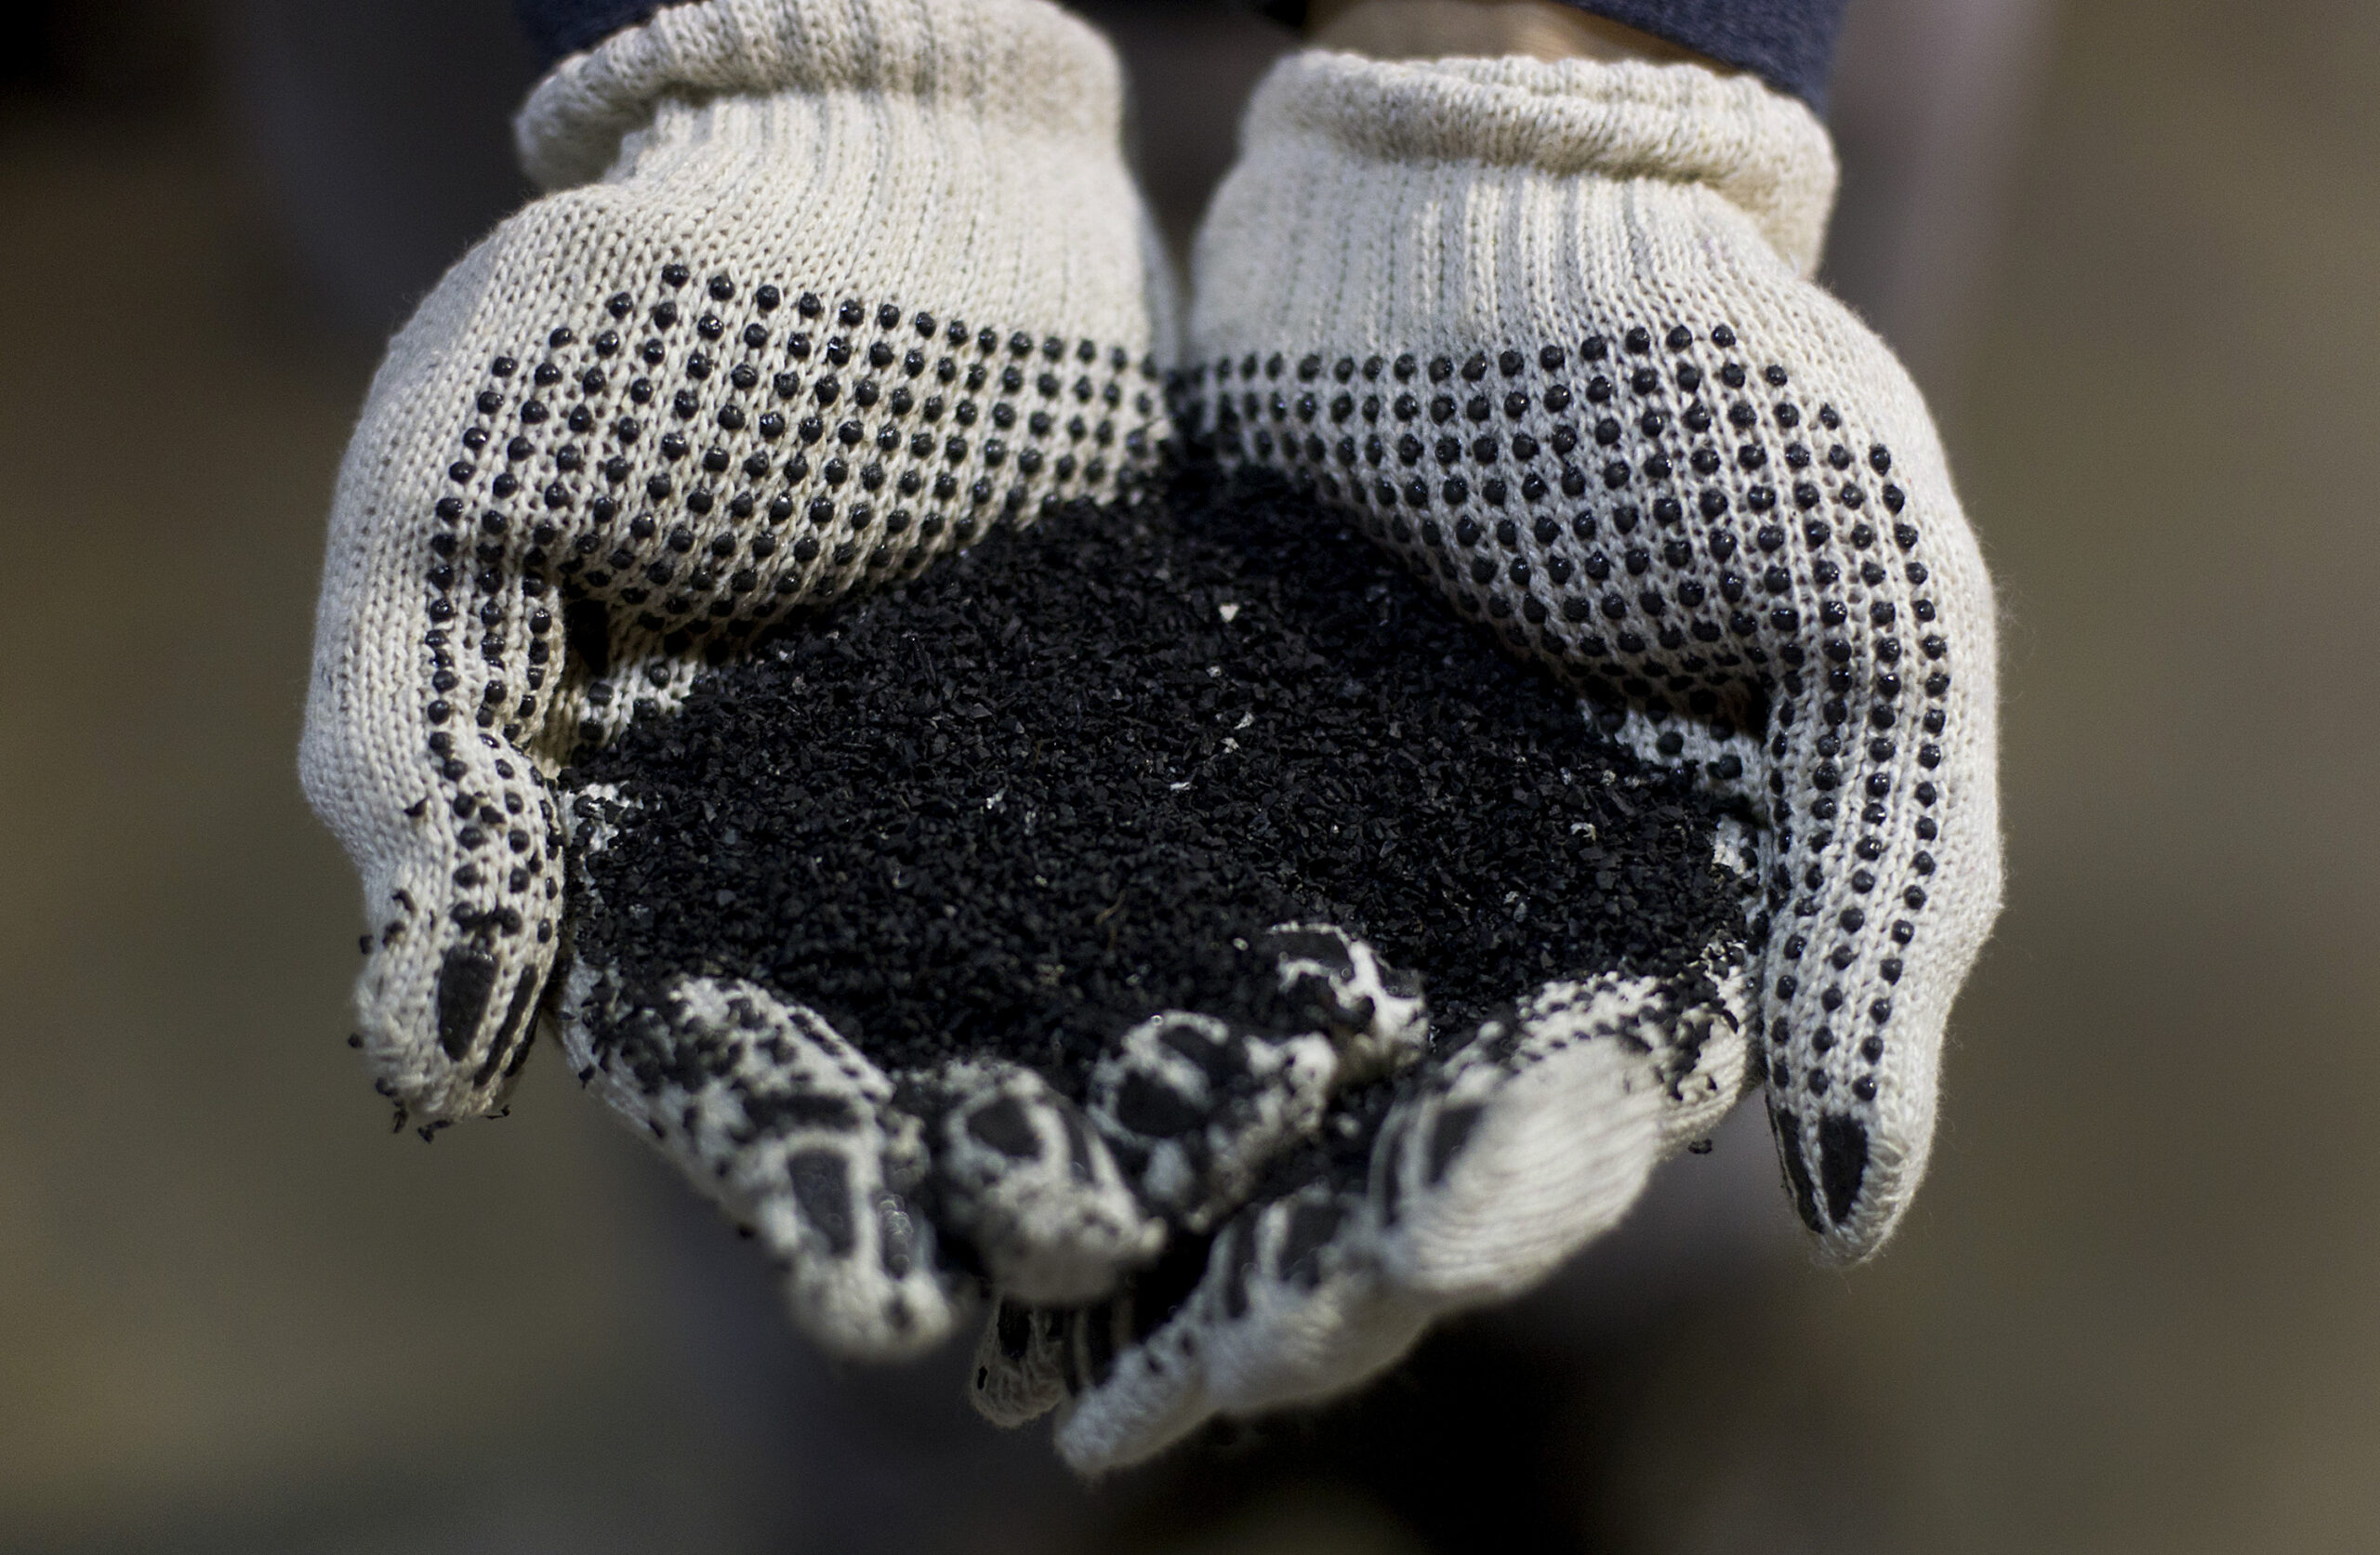 A worker displays crumb rubber at a tire recycling facility